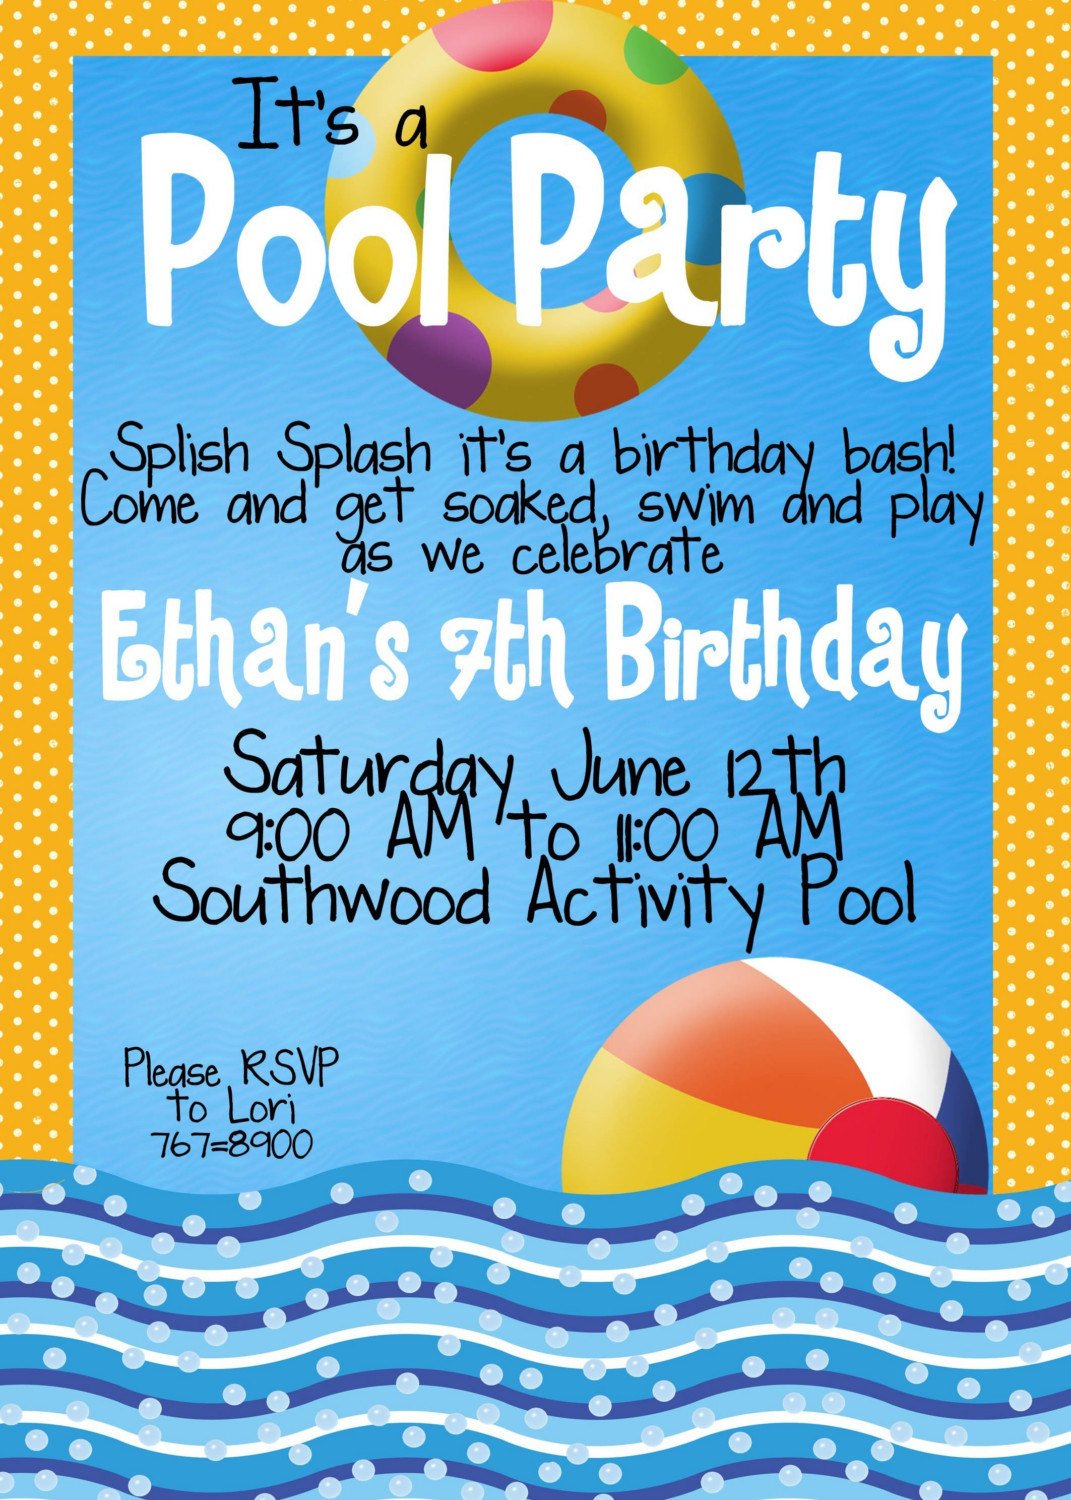 Pool Party Invitations by MagicbyMarcy on Etsy